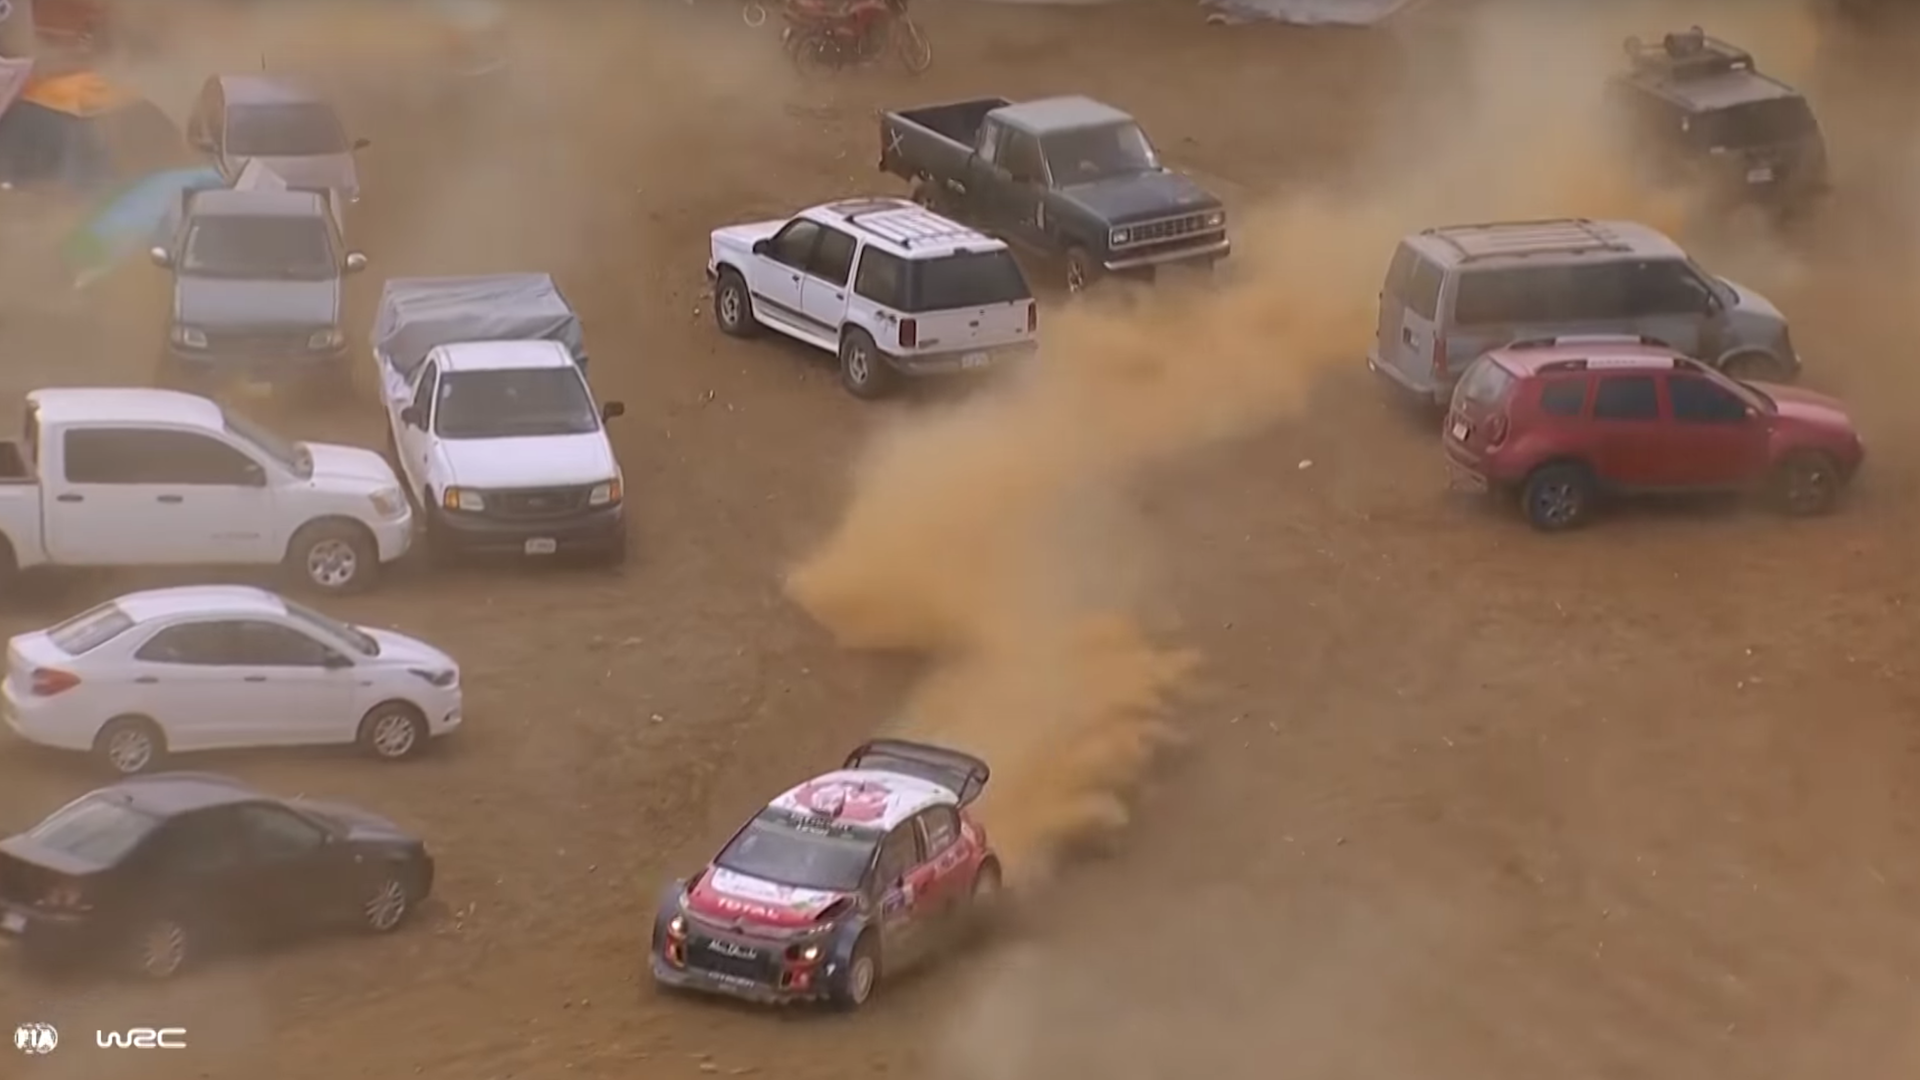 Watch Kris Meeke’s WRC Rally Car Fly Off-Course Into a Parking Lot…and Still Win